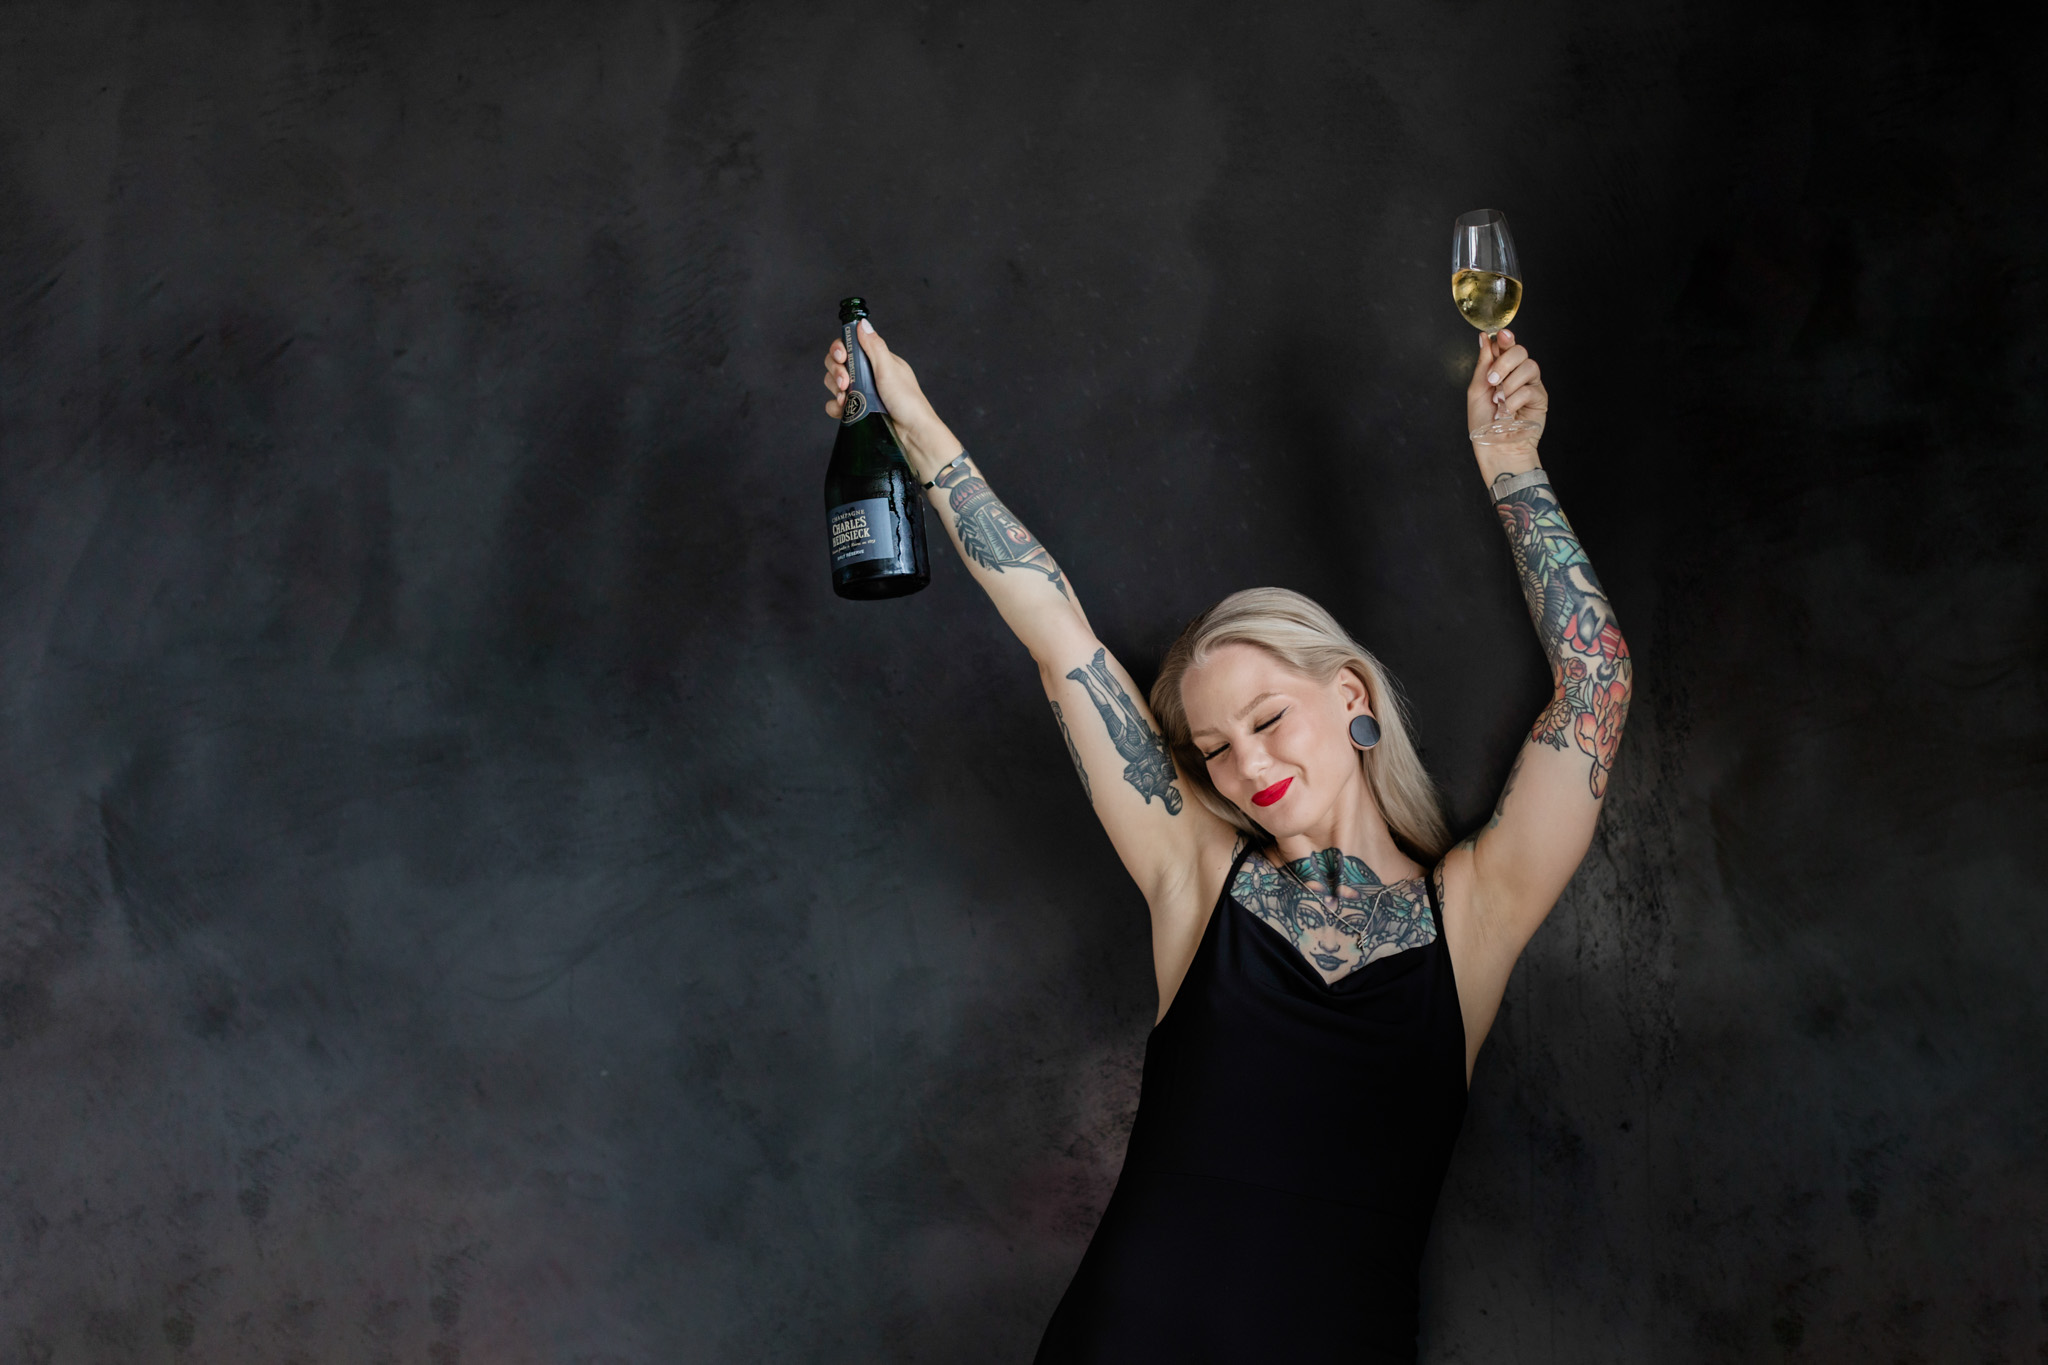 a brand photo of Katrin Berndt as she's holding a bottle and glass of champagne to celebrate a win